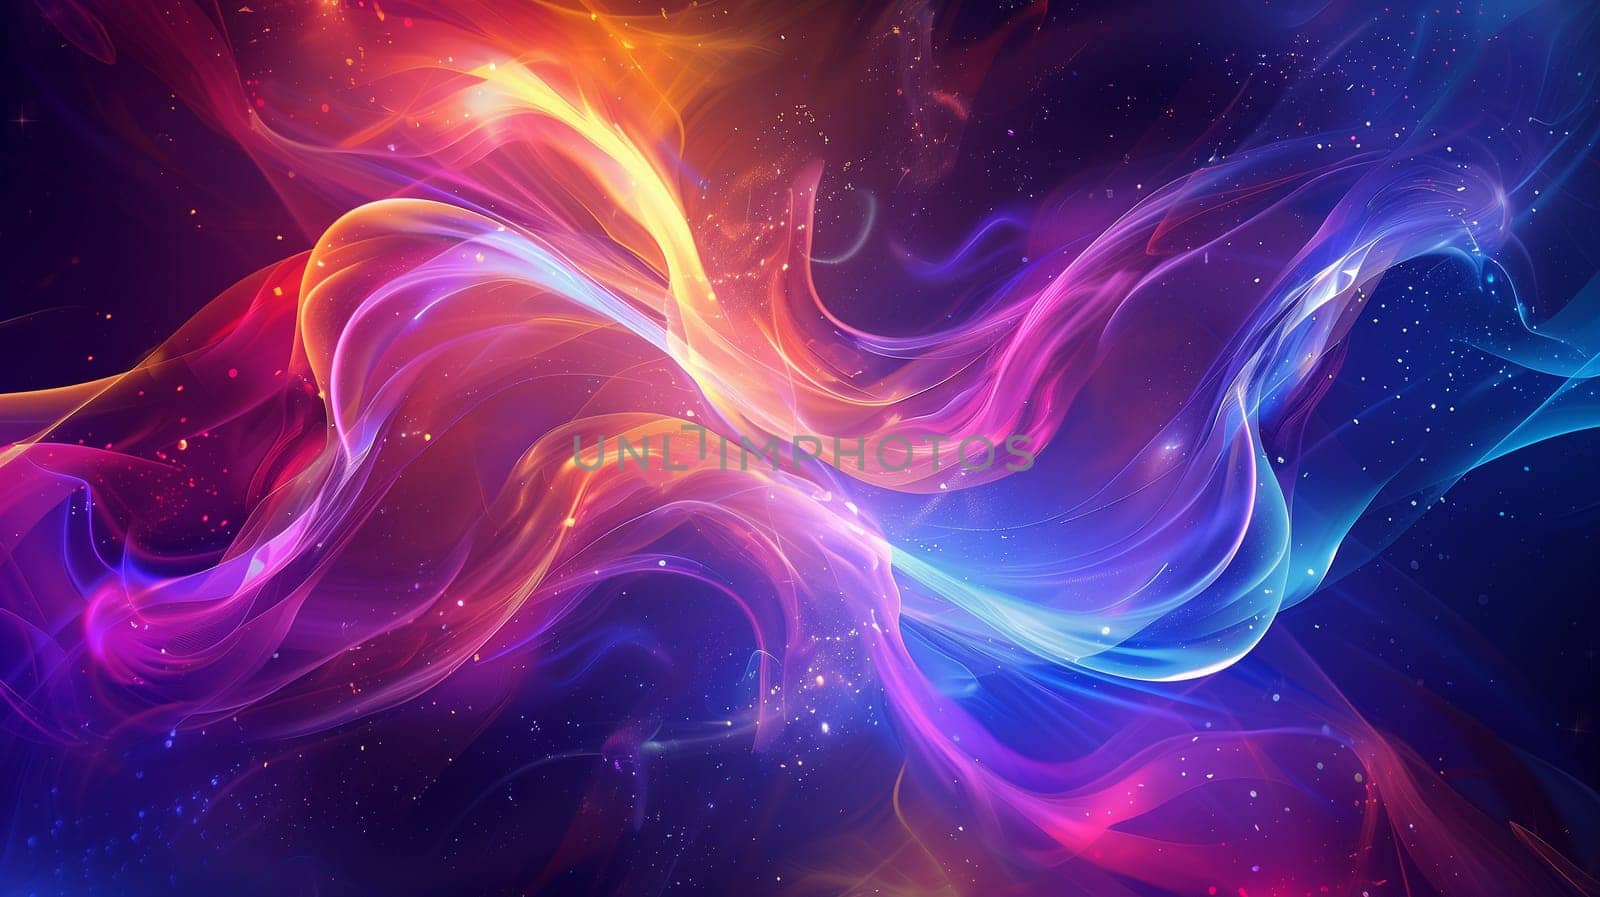 Beautiful 3d background with colorful waves and particles. High quality illustration